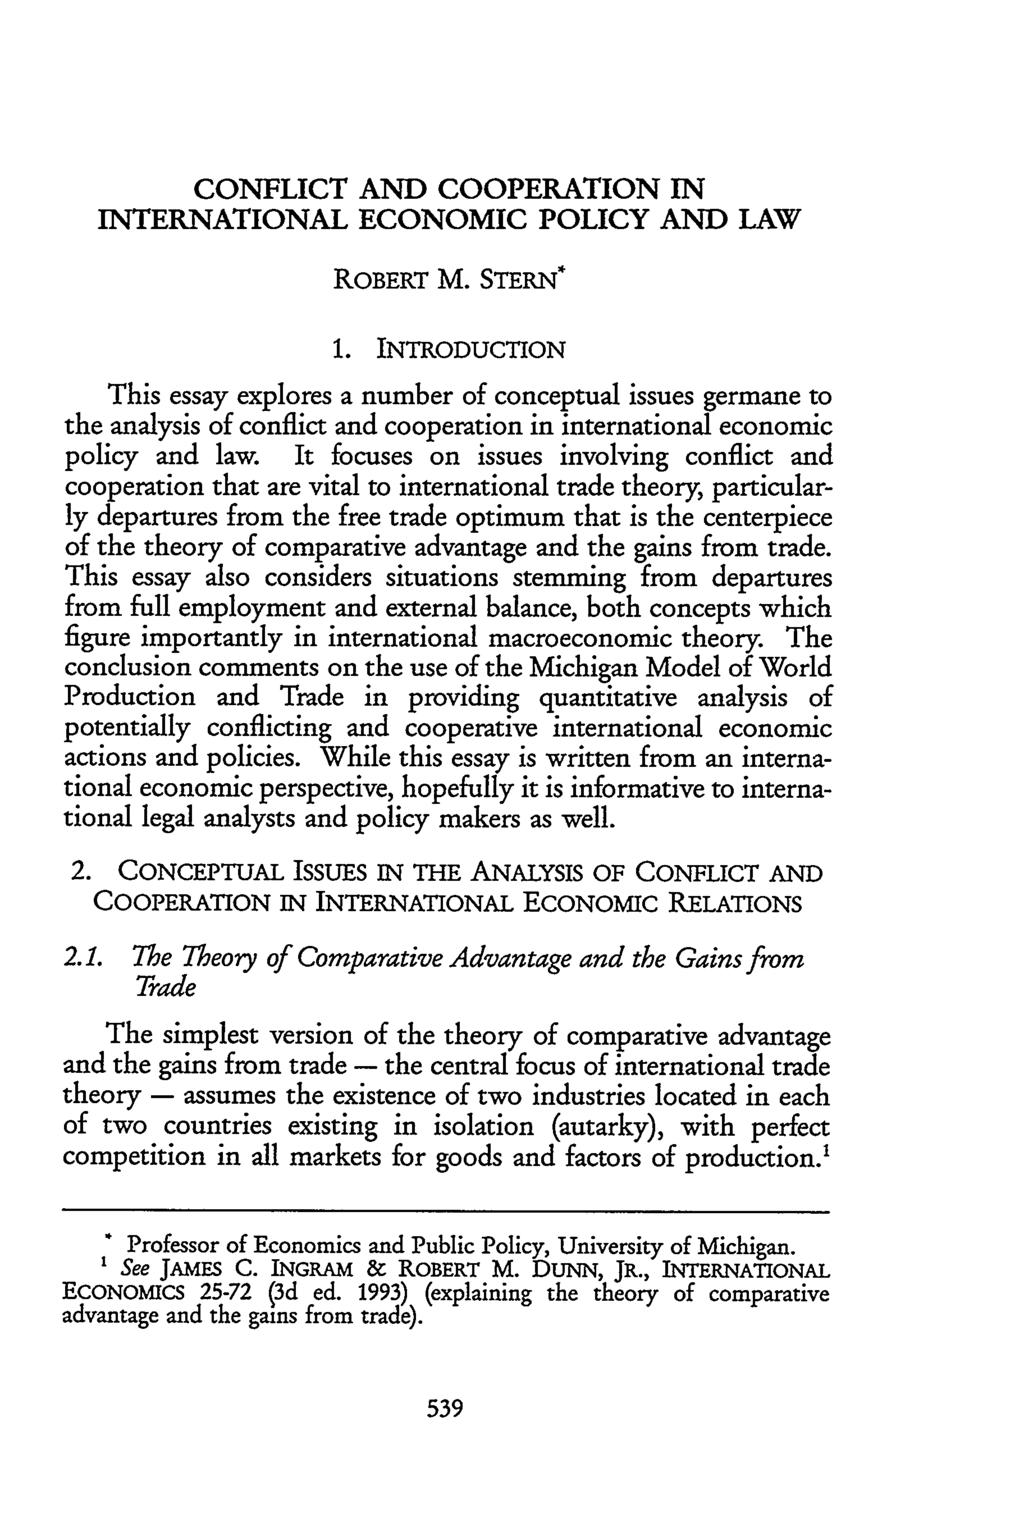 CONFLICT AND COOPERATION IN INTERNATIONAL ECONOMIC POLICY AND LAW ROBERT M. STERN* 1.